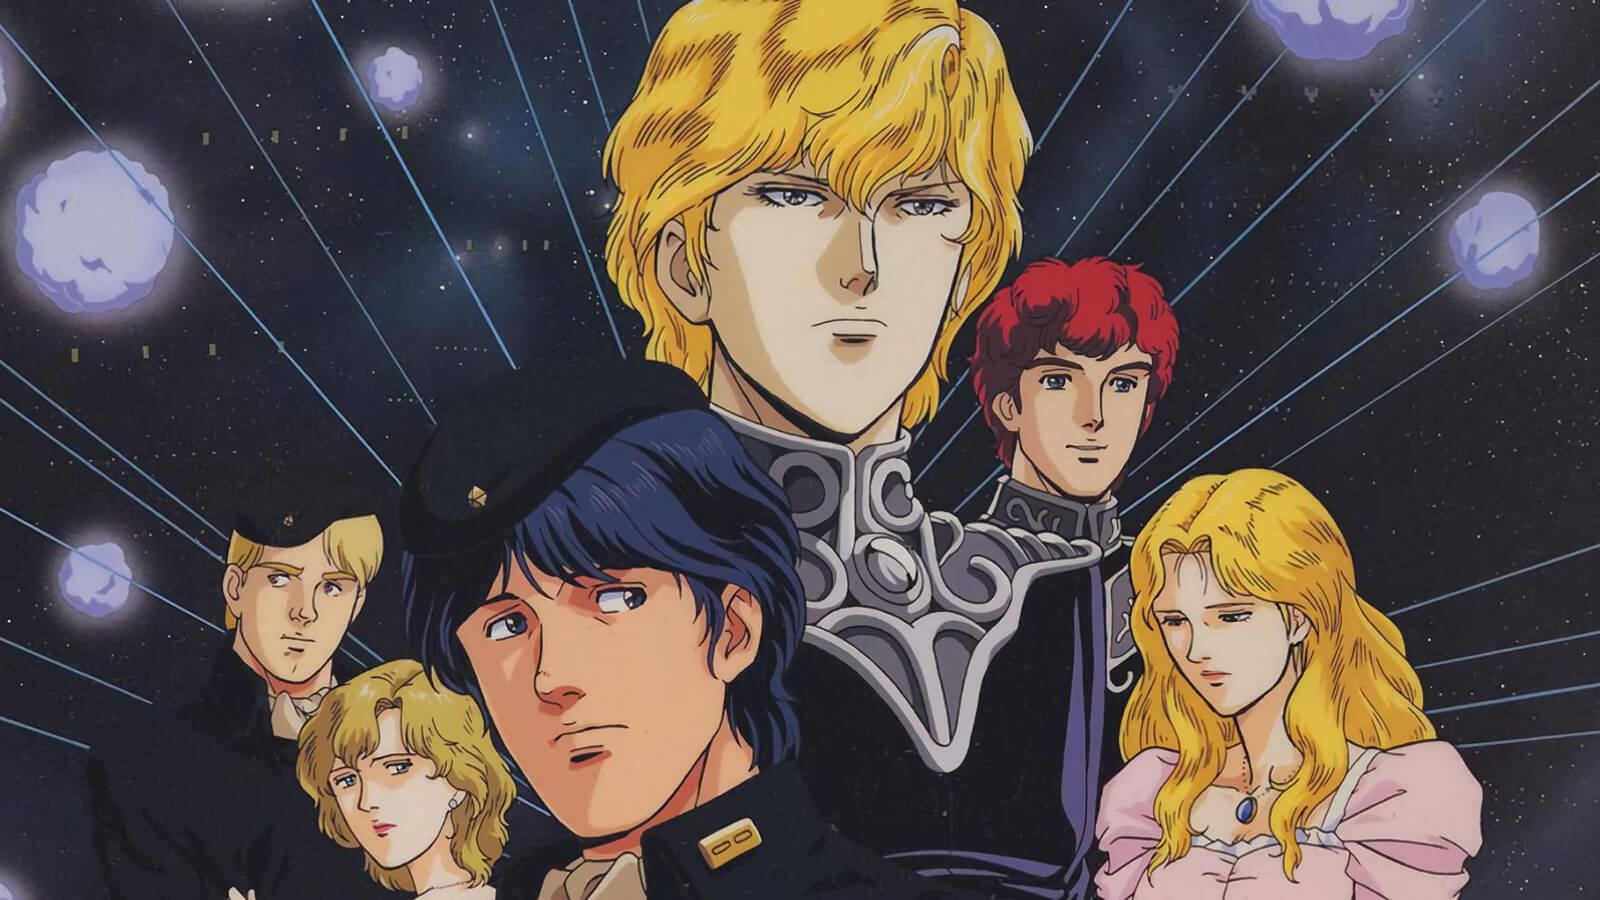 Best Sci-Fi Anime - Legend of the Galactic Heroes